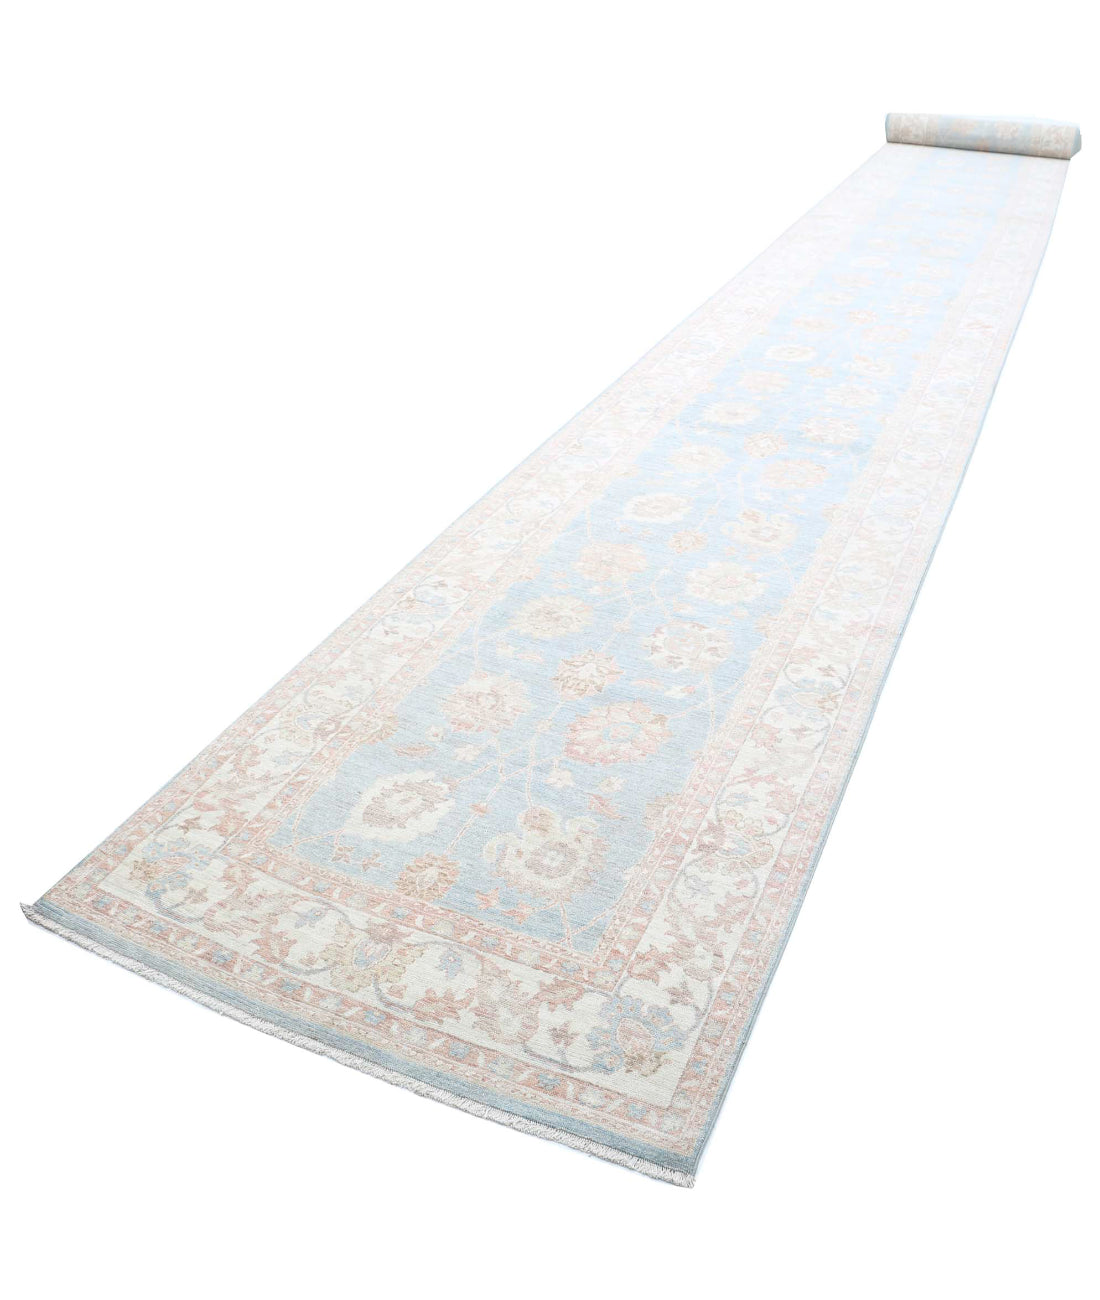 Serenity 4'1'' X 43'4'' Hand-Knotted Wool Rug 4'1'' x 43'4'' (123 X 1300) / Blue / Ivory